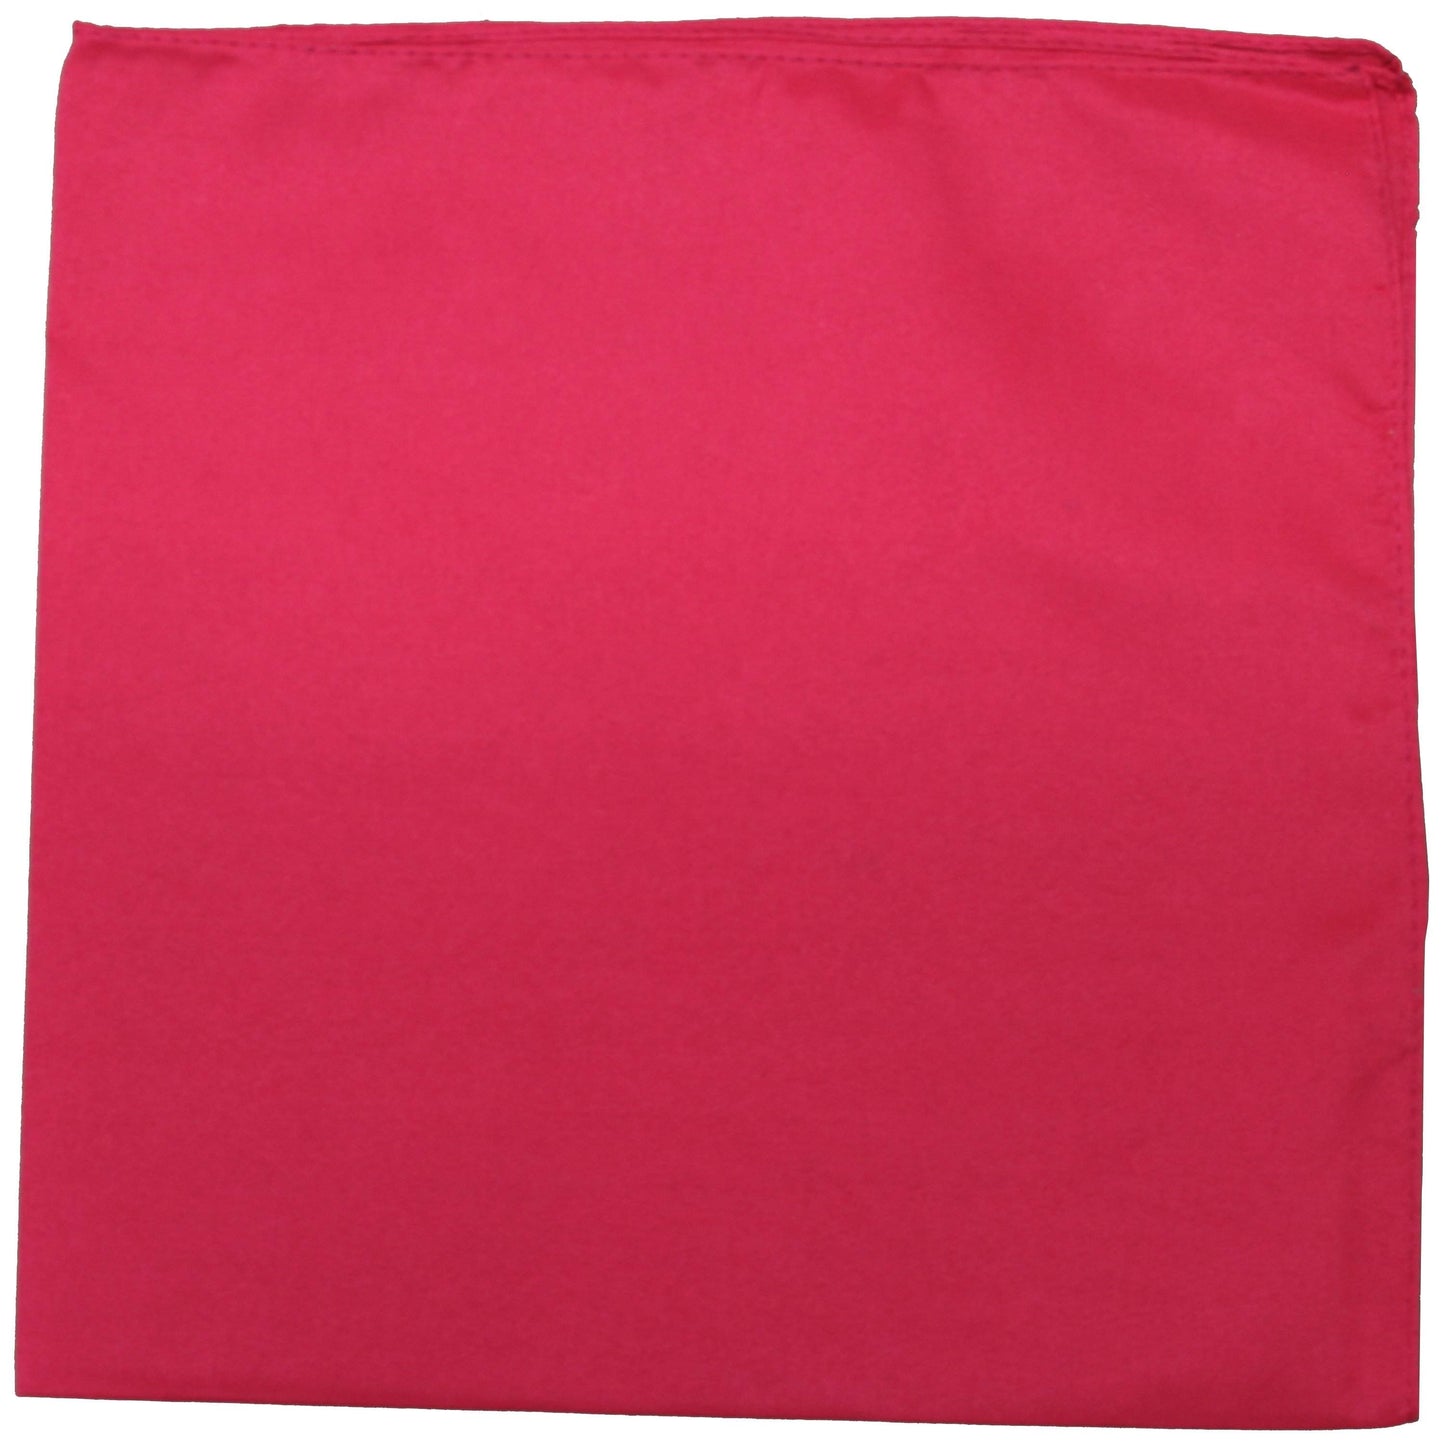 65 Pack Qraftsy Solid Polyester Bandanas - Wholesale Lot